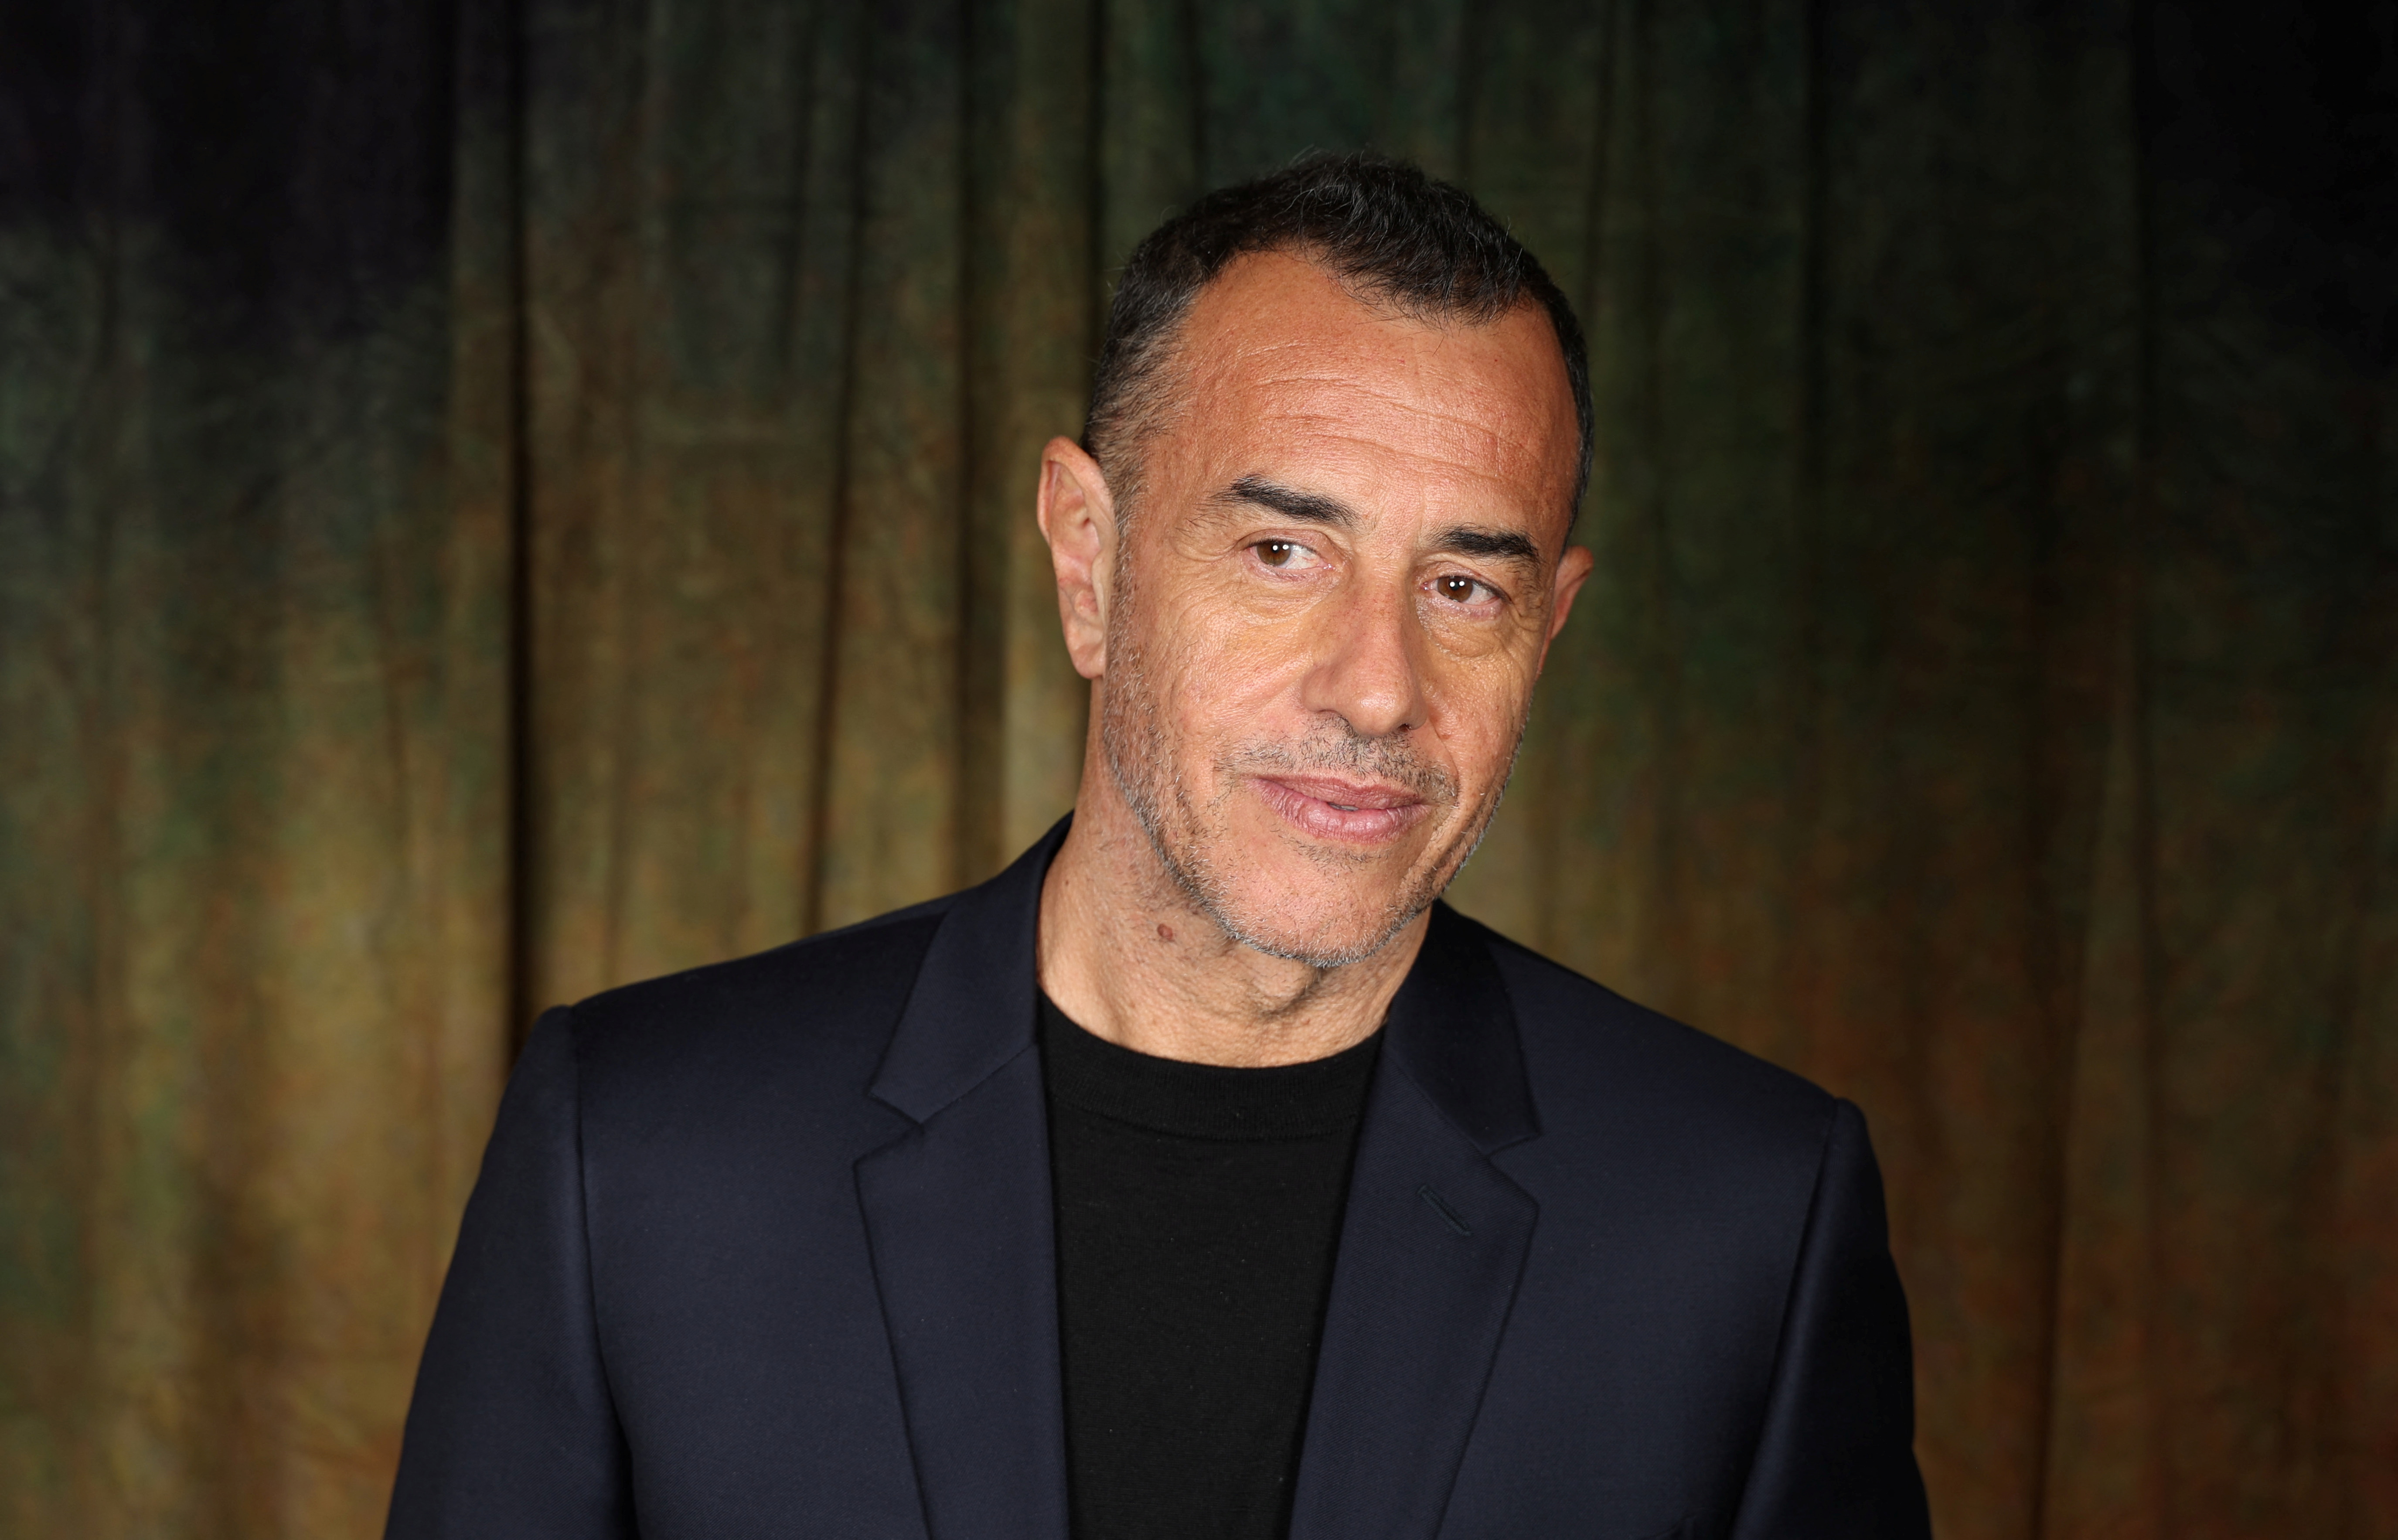 Director Matteo Garrone is hoping 'Io Capitano' will shift perspectives about migrants. /Mario Anzuoni/Reuters